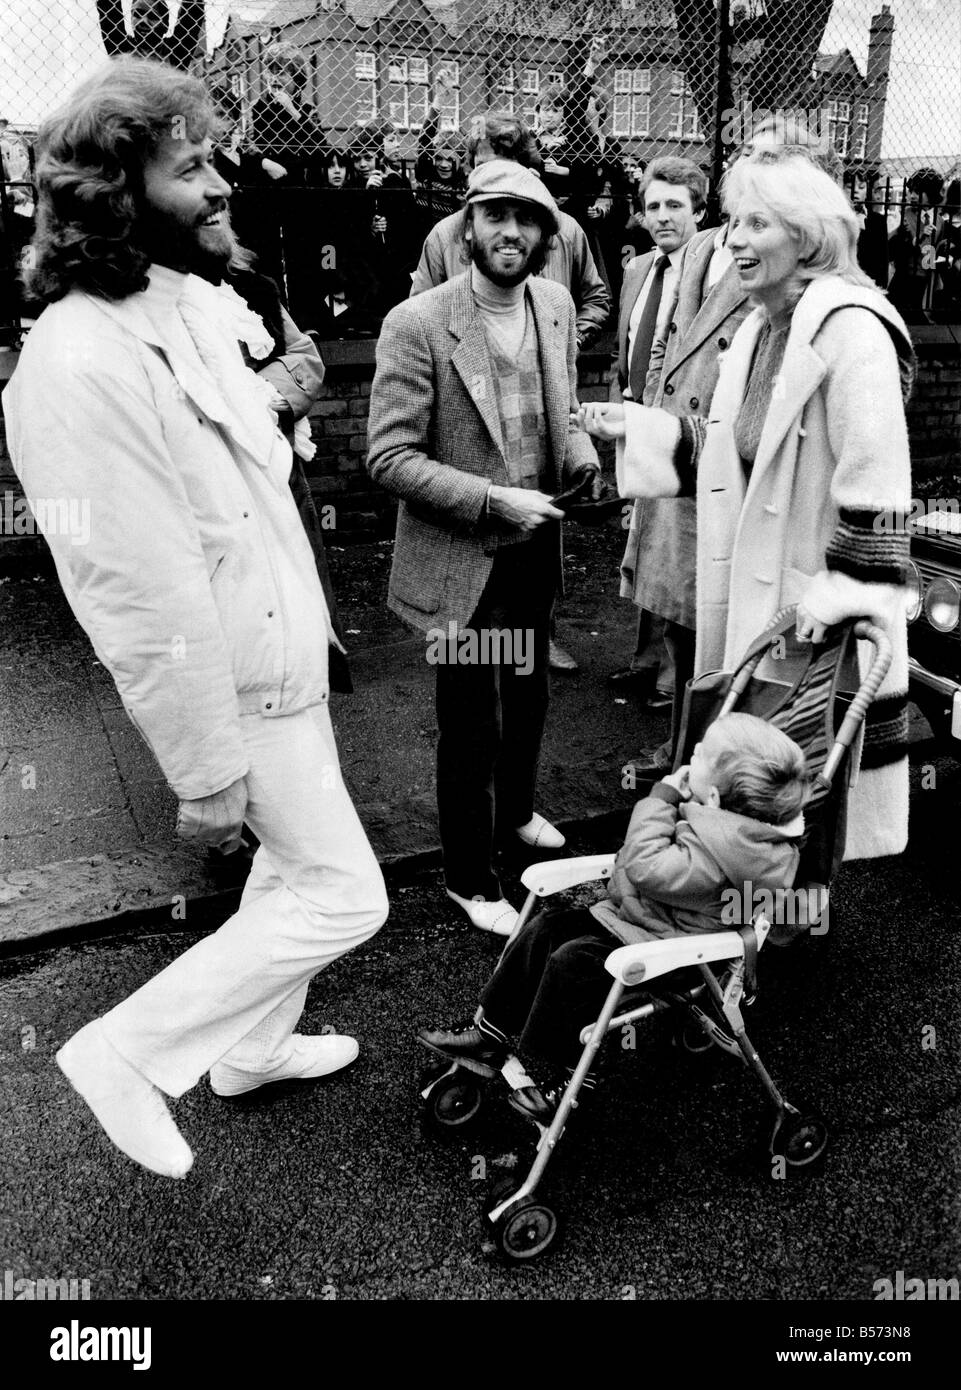 Bee Gees - Exclusive. After 24 years the Bee Gees, Barry, Robin and Maurice Gibb go back to their roots in a suburb of Manchester. November 1981 P003741 Stock Photo